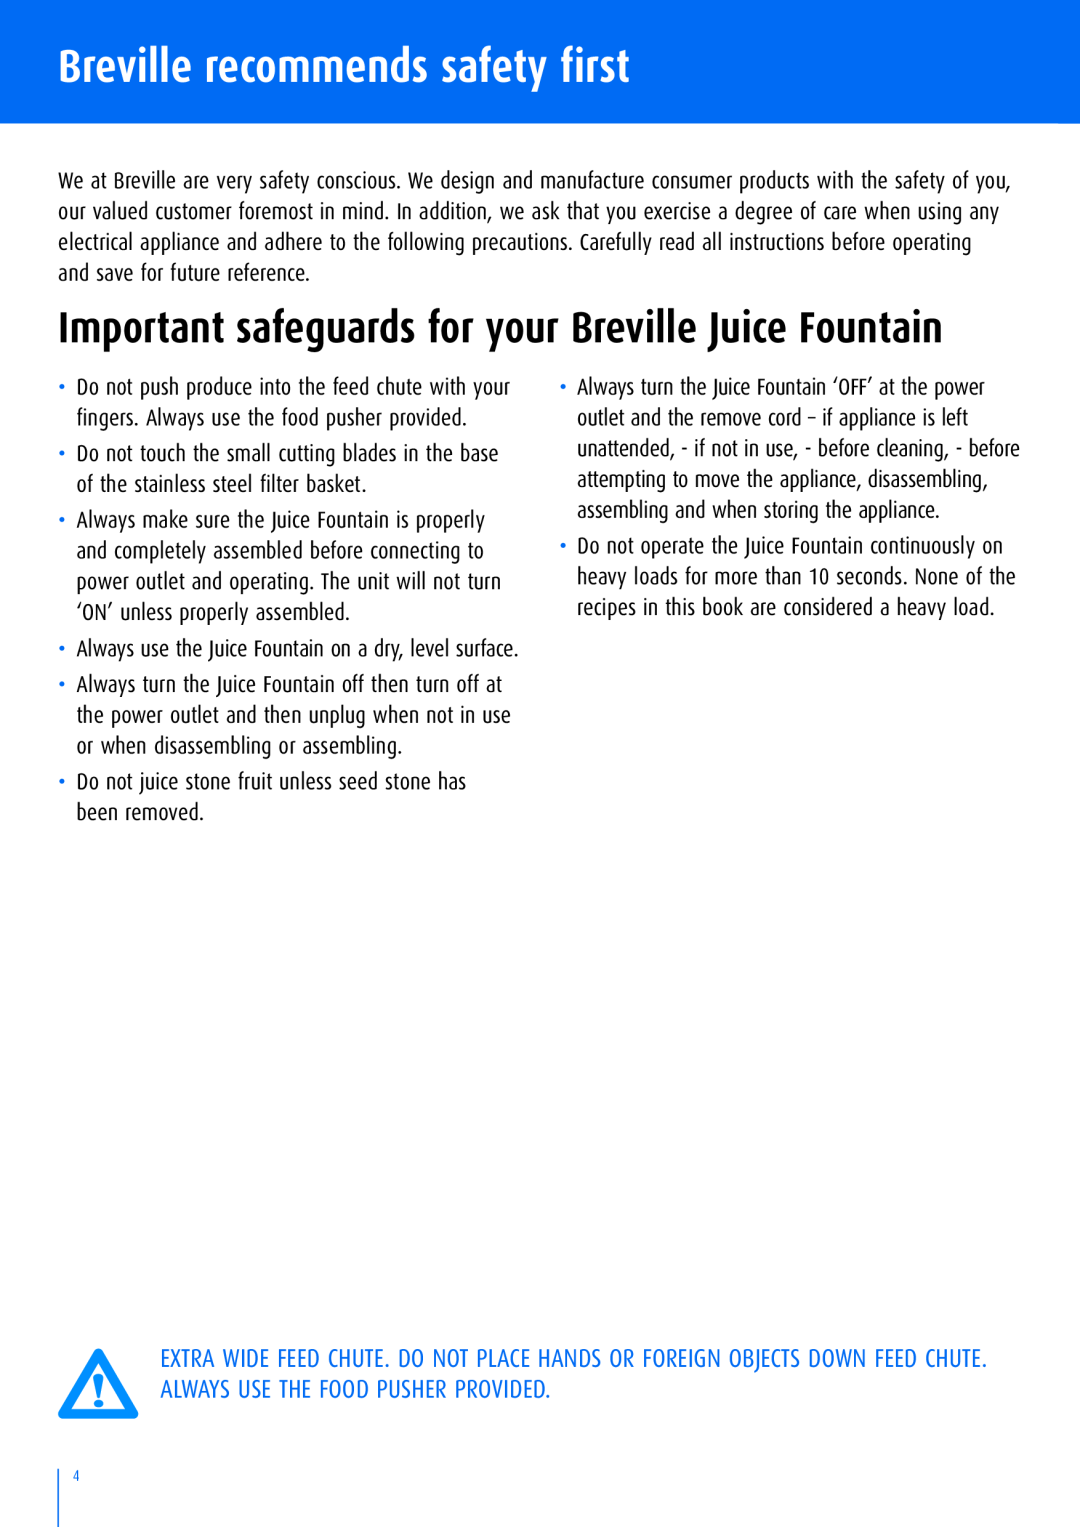 Breville BJE200C manual Breville recommends safety first, Important safeguards for your Breville Juice Fountain 